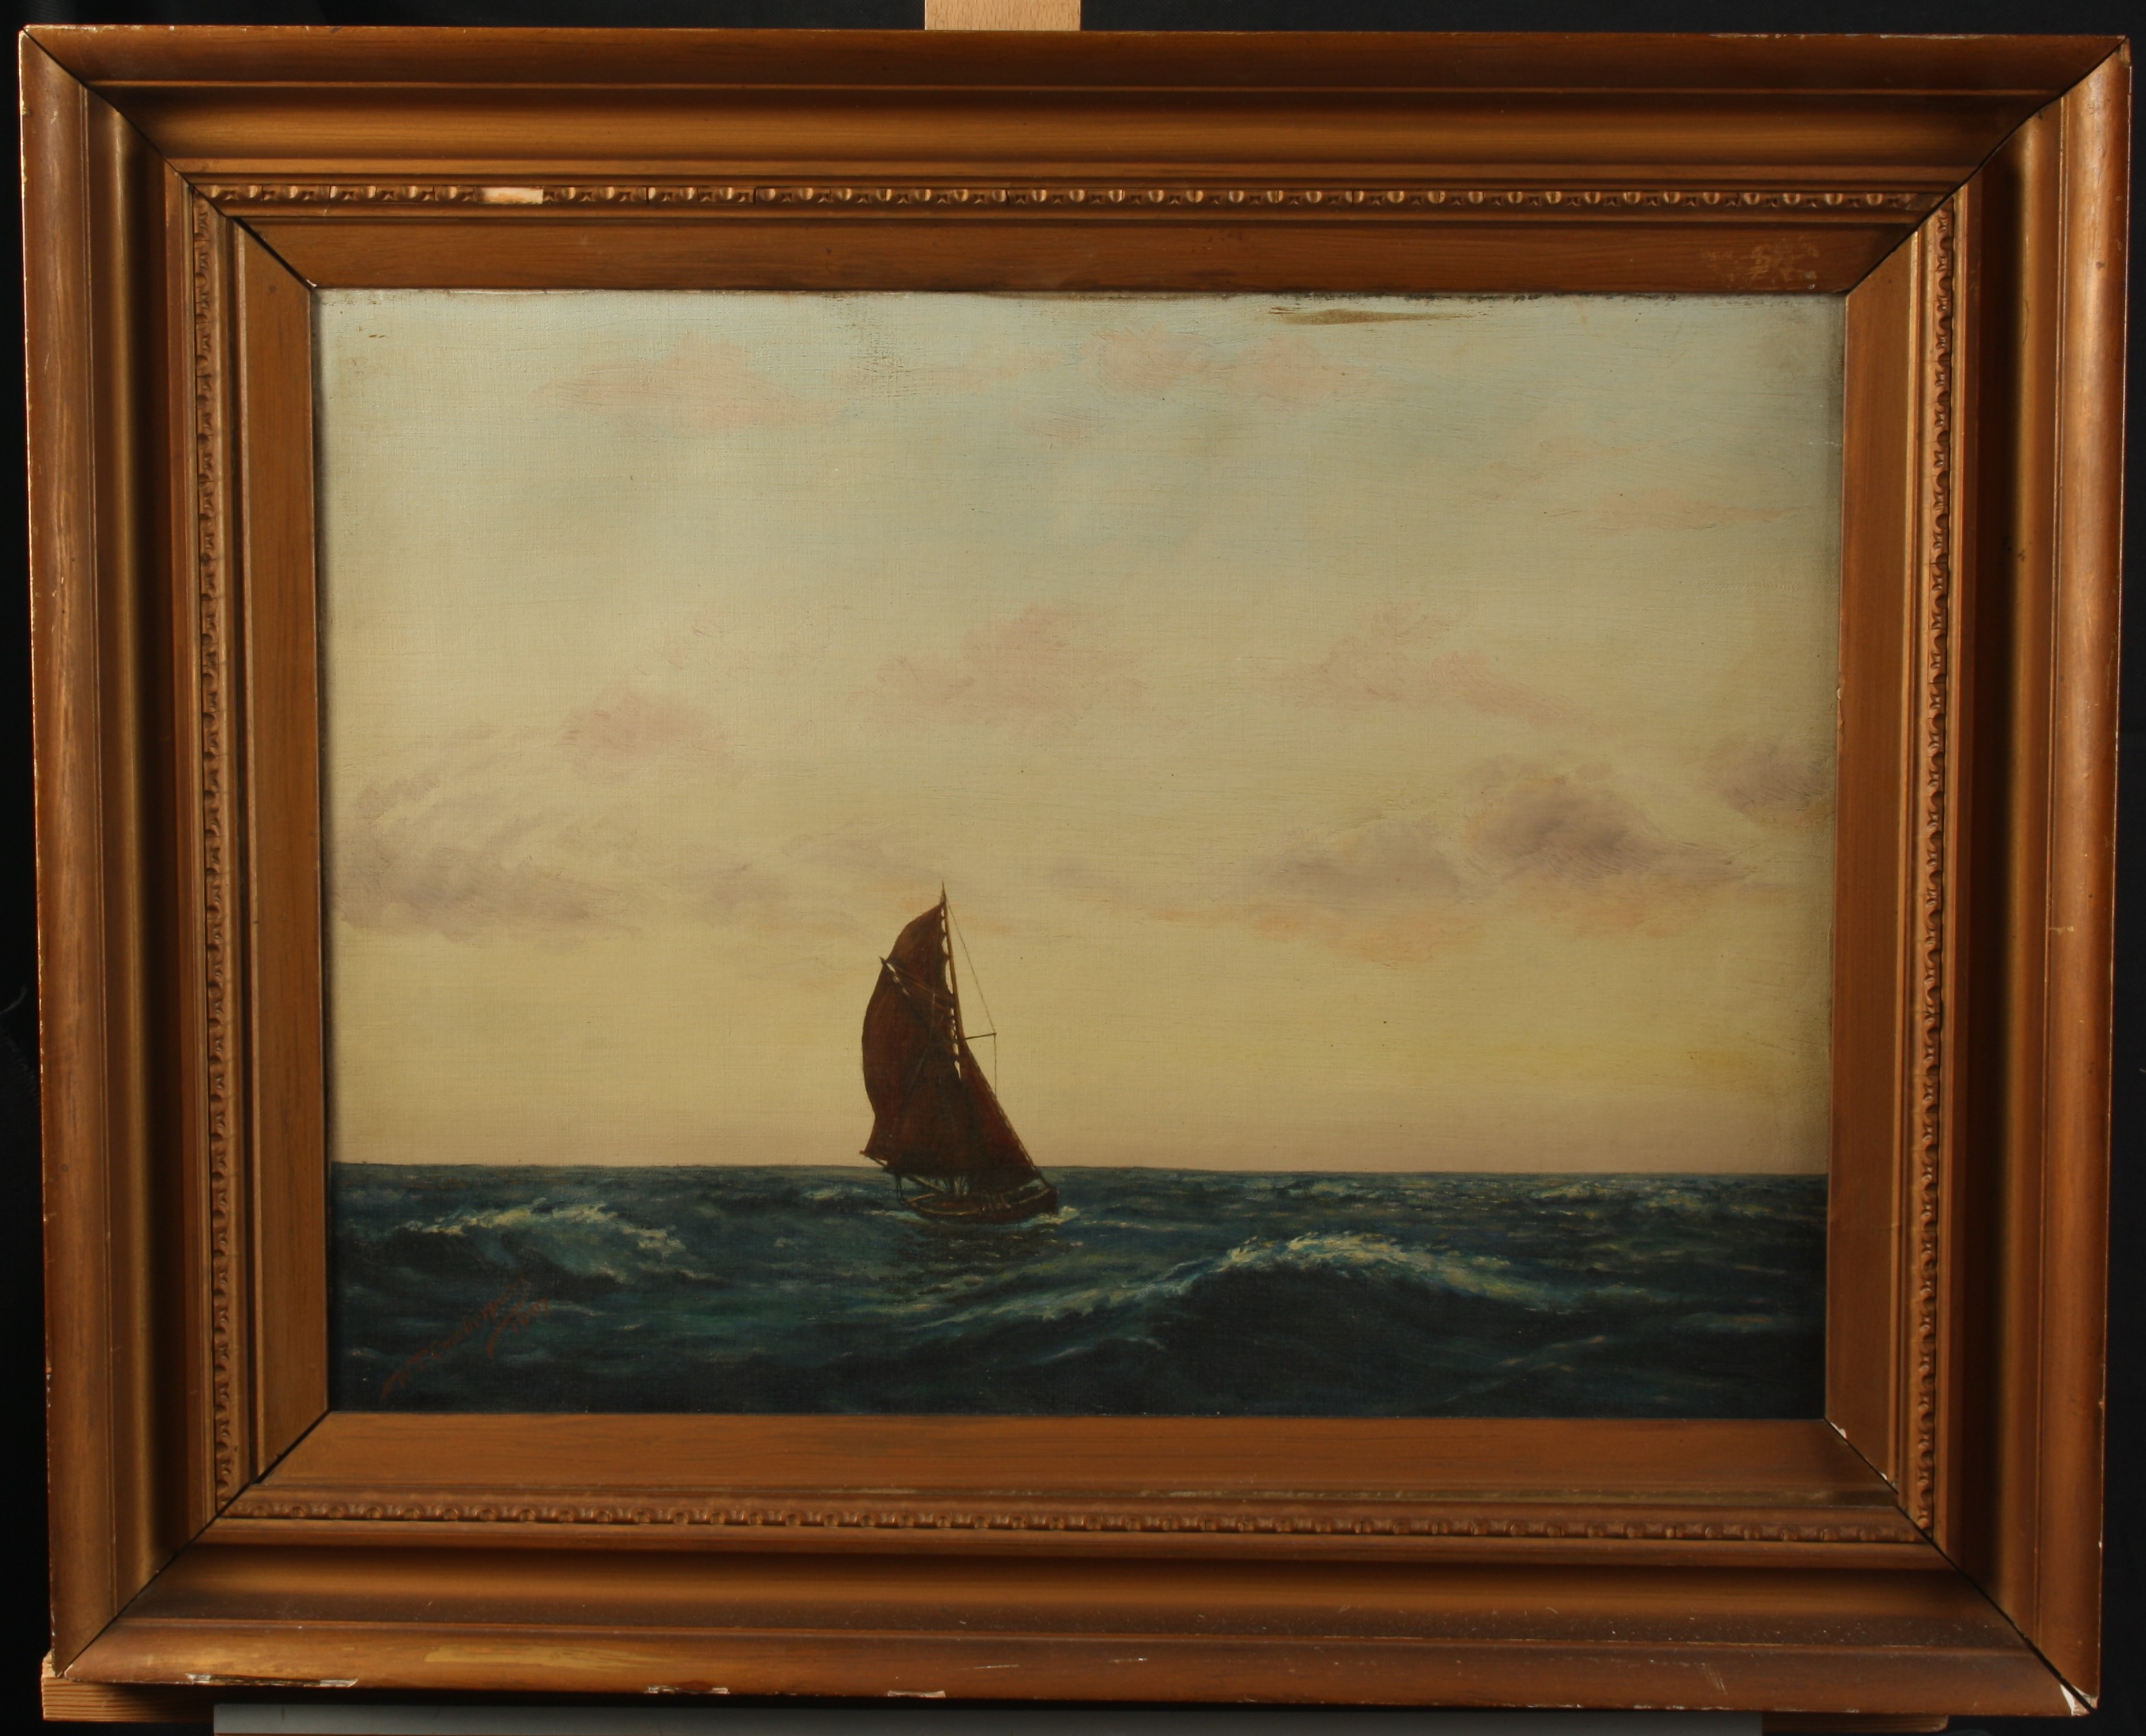 W B CUMBERPATCH A lone fishing lugger Oil on canvas Signed and dated 1907 38 x 51cm - Image 2 of 2